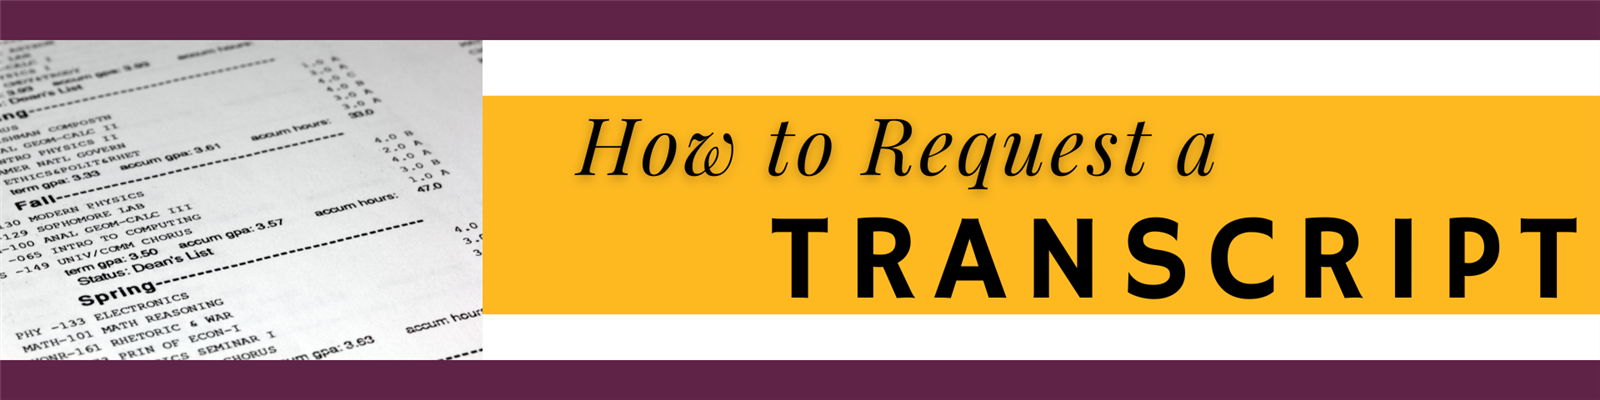 How to Request a Transcript